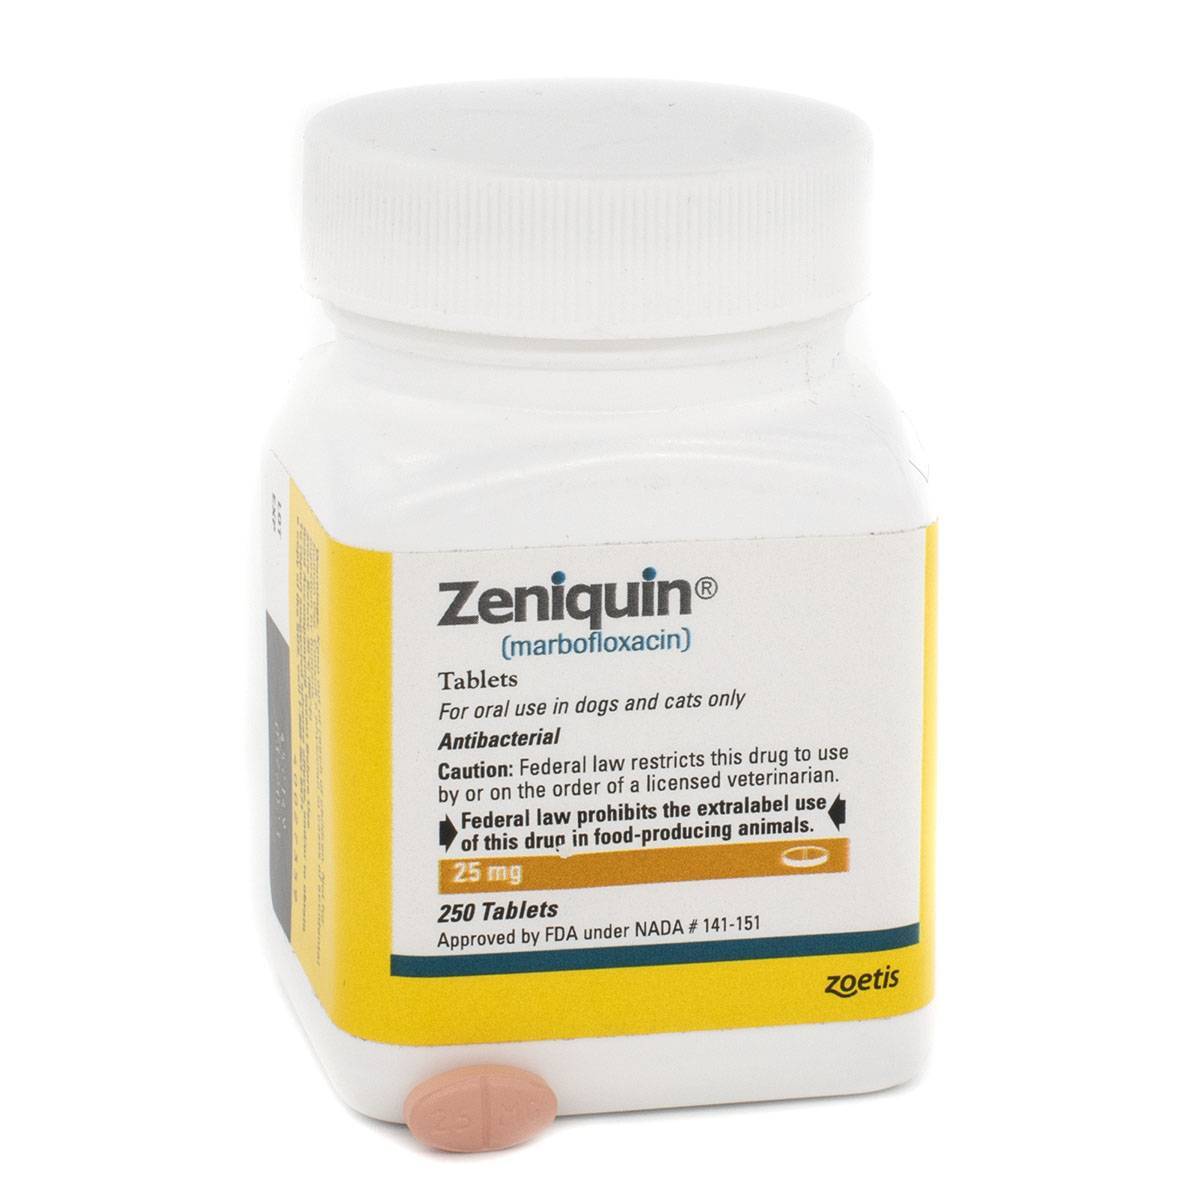 Marbofloxacin Zeniquin for Dogs and Cats VetRxDirect